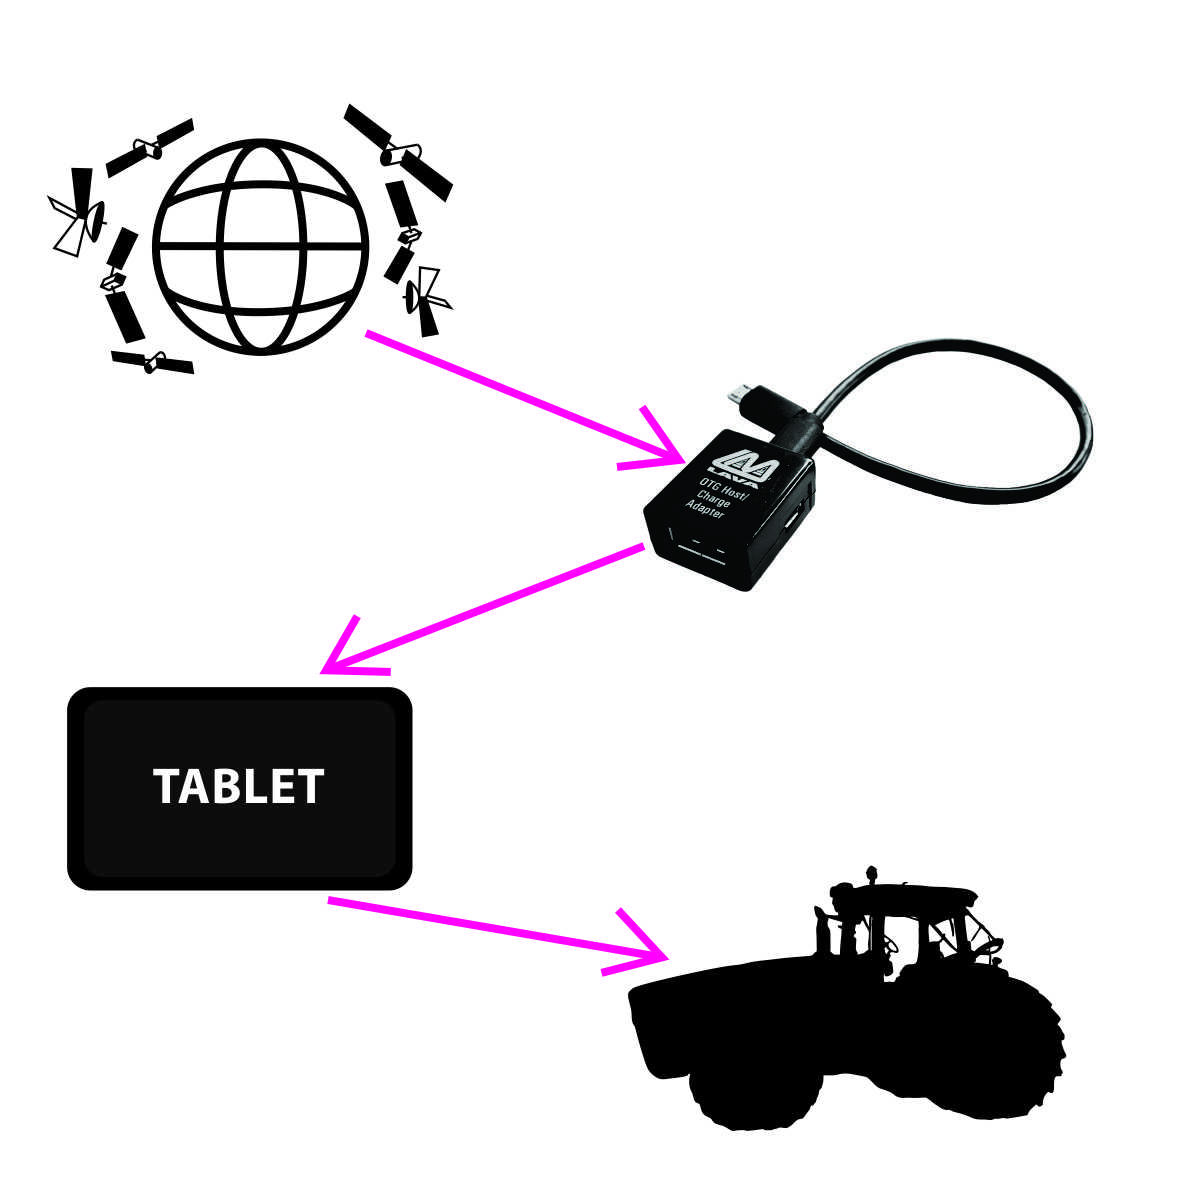 Portable_Tractor_Guidance_System_Blog_Web